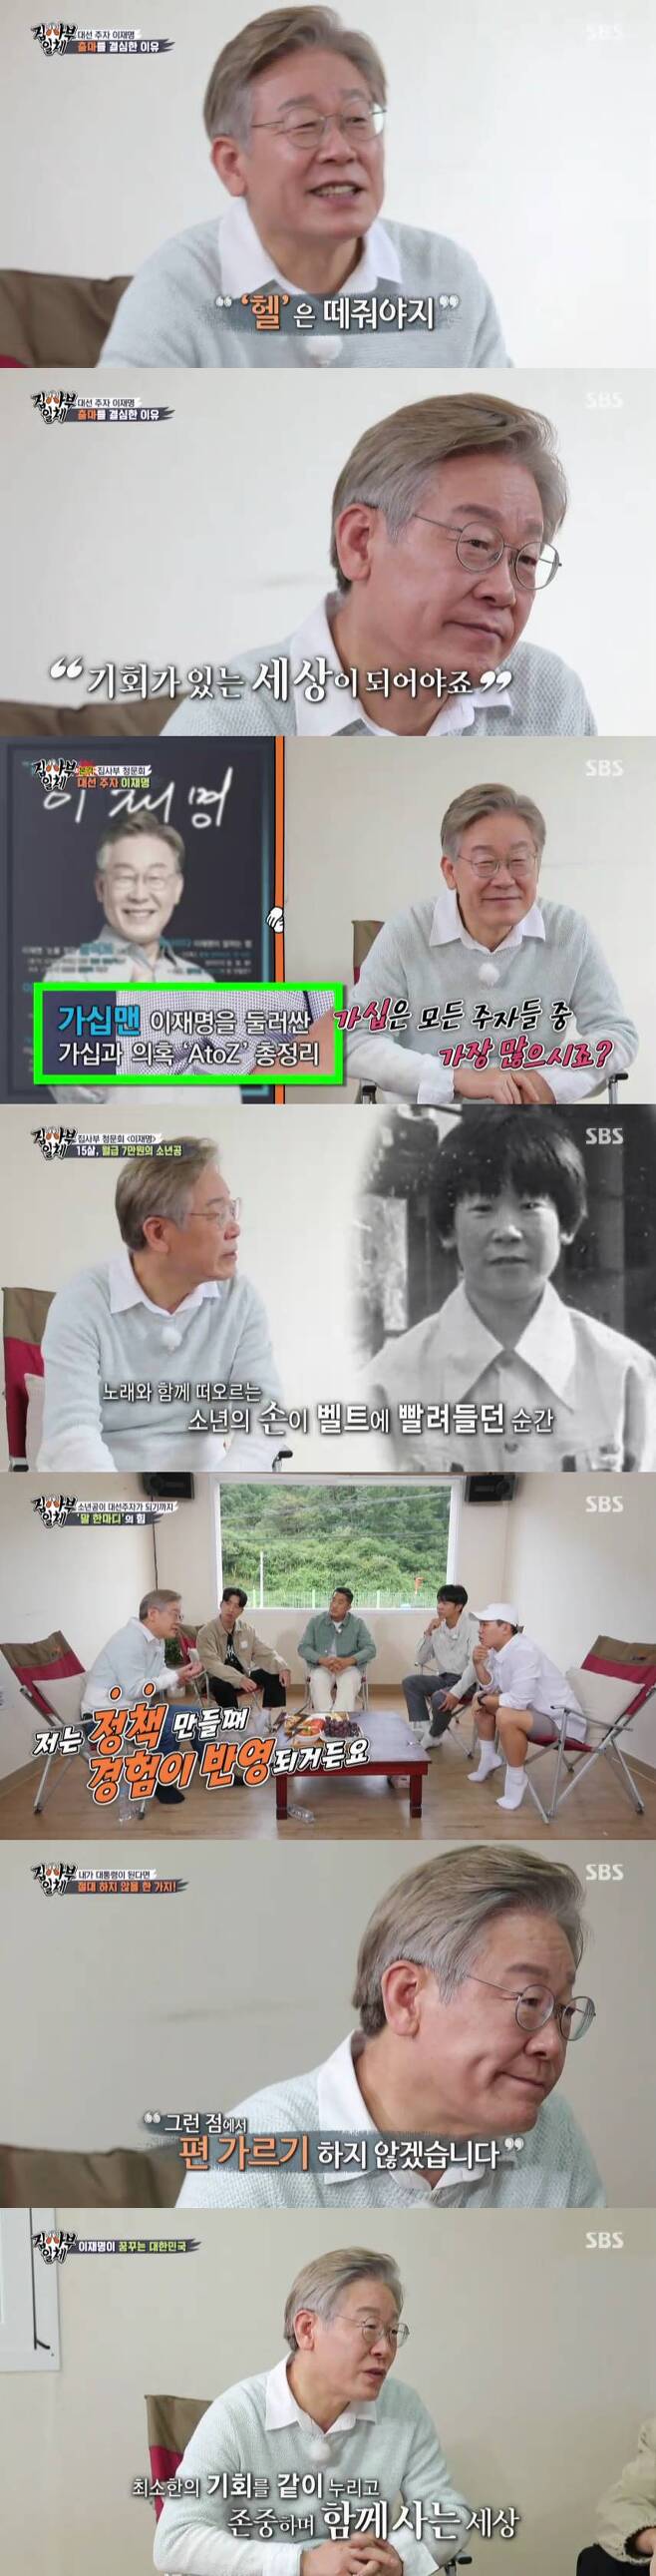 Lee Jae-myung, a special feature of SBS All The Butlers For, focused his attention on the double digits of TV viewer ratings.According to Nielsen Korea, a TV viewer rating company, Seoul Capital Area TV viewer ratings of SBS All The Butlers, which was broadcast on the 26th, attracted attention with 10.1% and 2049 target TV viewer ratings, which are topical and competitive indicators, ranked first with 4.1%.Top TV viewer ratings per minute soared to 13.5 per cent.TV viewer ratings rose 2.3 percentage points from 7.8 percent for Seoul Capital Area TV viewer ratings a week ago, when former Attorney General Lee Nak-yeon appeared.Lee Jae-myung, the governor of Gyeonggi Province, appeared as master on the day of the special feature of For runner after last week.The place where the members met Lee Jae-myung was Andong Station.Lee Jae-myung, who spent his childhood at Andong Station, said, I wanted to show you what it is. It is not really rough, it is very timid and emotional.He knew me as a very rough person, and it was an opportunity to show that I was not such a person. He has attracted attention by revealing the various issues surrounding him through the All The Butlers hearing as well as the story of his life in the difficult environment since he was a boy.Lee Jae-myung said that he was suffering from a disability while living in a factory as a child when he decided to run for For. I was used to it at the time, and I thought it was natural.I wanted to change the world, he said. There are young people who call this country we live in hell.If I believe I can make something by making reasonable efforts, I wont. Im not going to do it.Since then, the All The Butlers hearing has begun.Members asked about former prosecutor general Yoon Seok-ryul and former Democratic Party leader Lee Nak-yeon as a common question for For.Lee Jae-myung cited the economy as the strength he wanted to bring from Lee Nak-yeon, and the evaluation that it would be fair from Yoon Seok-ryul.He added, I have no reason to win because it is an internal competition with Lee Nak-yeon, he said, describing Yoon Seok-ryul as a competitor to win and Lee Nak-yeon as a competitor to win.Lee Jae-myung, who asked, If you become a president, you will never do it. I will not side with you, he said. When you compete, you represent the Democratic Party but you represent everyone when you become president.I will not take sides in that regard, he said.Finally, Lee Jae-myung asked the question of Korea I dream of, A common sense world where you do not lose the rule if you break the rules.Everyone is in harmony, enjoying the least opportunity, respecting and living together. Meanwhile, the special feature of All The Butlers For will be featured by former prosecutor-general Yoon Seok-ryul and Gyeonggi-do Governor Lee Jae-myung, followed by former Democratic Party leader Lee Nak-yeon on October 3.